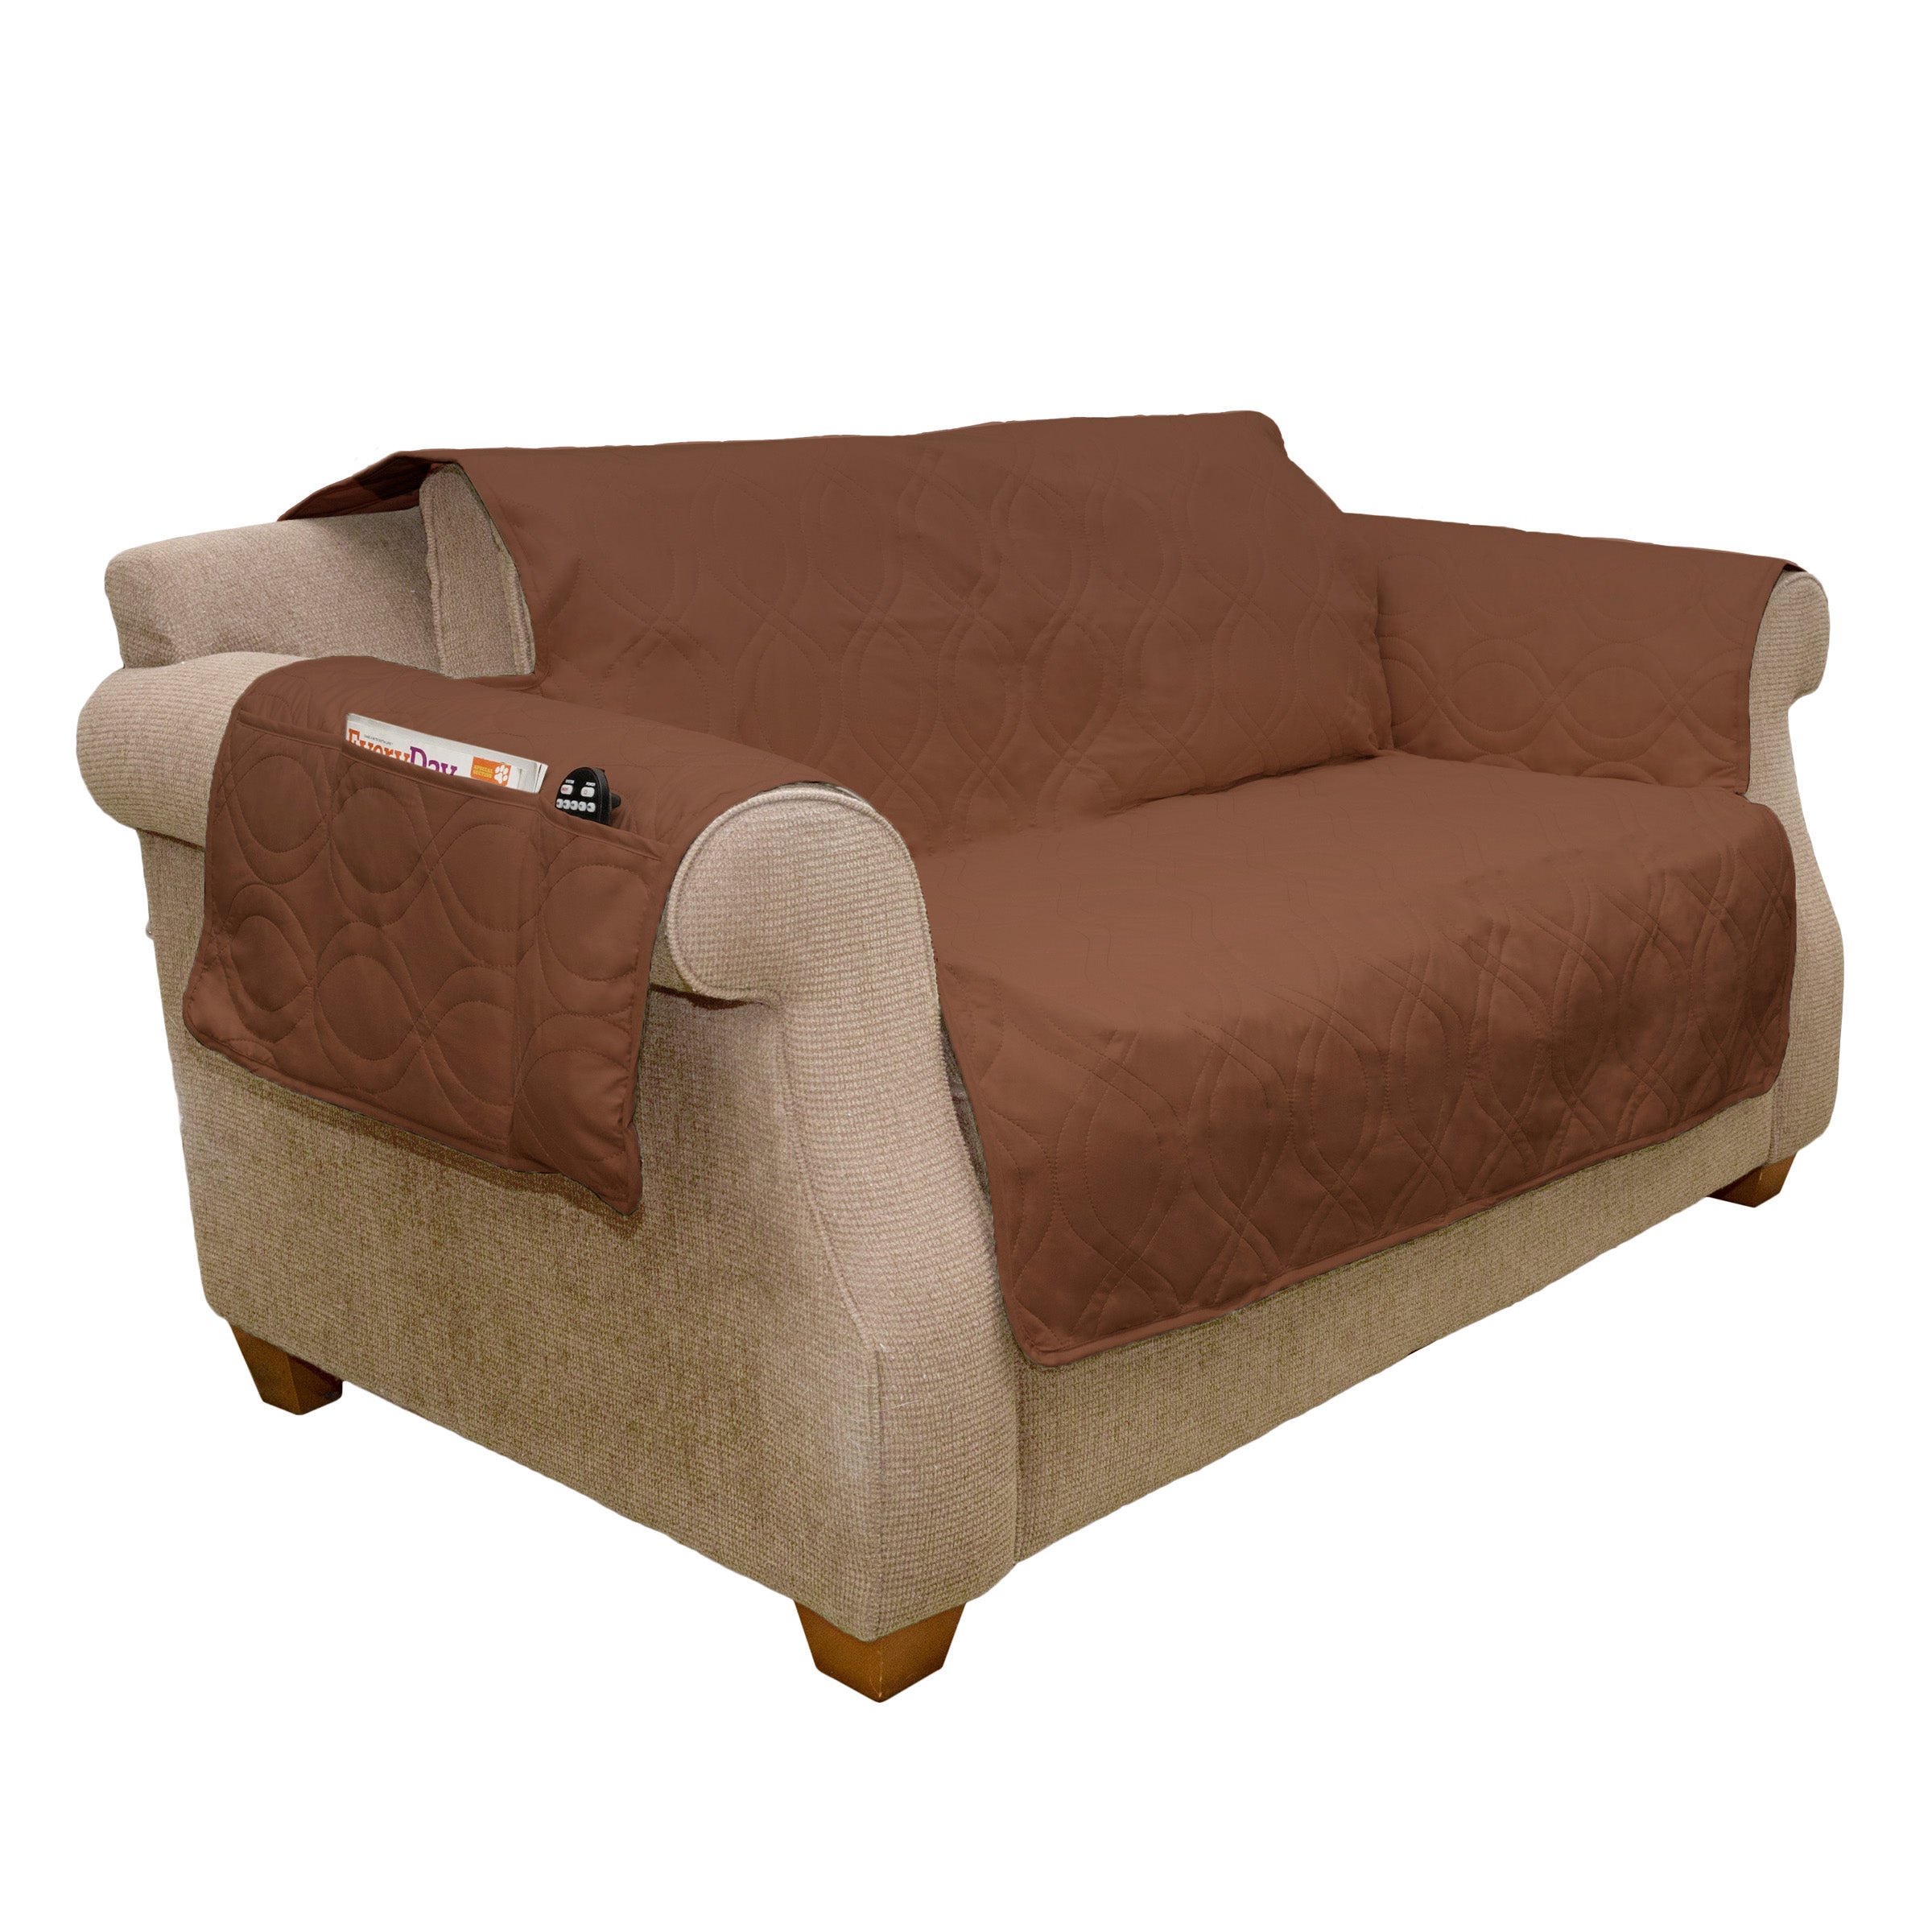 Realistic Brown Leather Upholstery Sofa couch Repair Tape Patch Cover Tears  Hole - Sofas, Loveseats & Sectionals, Facebook Marketplace